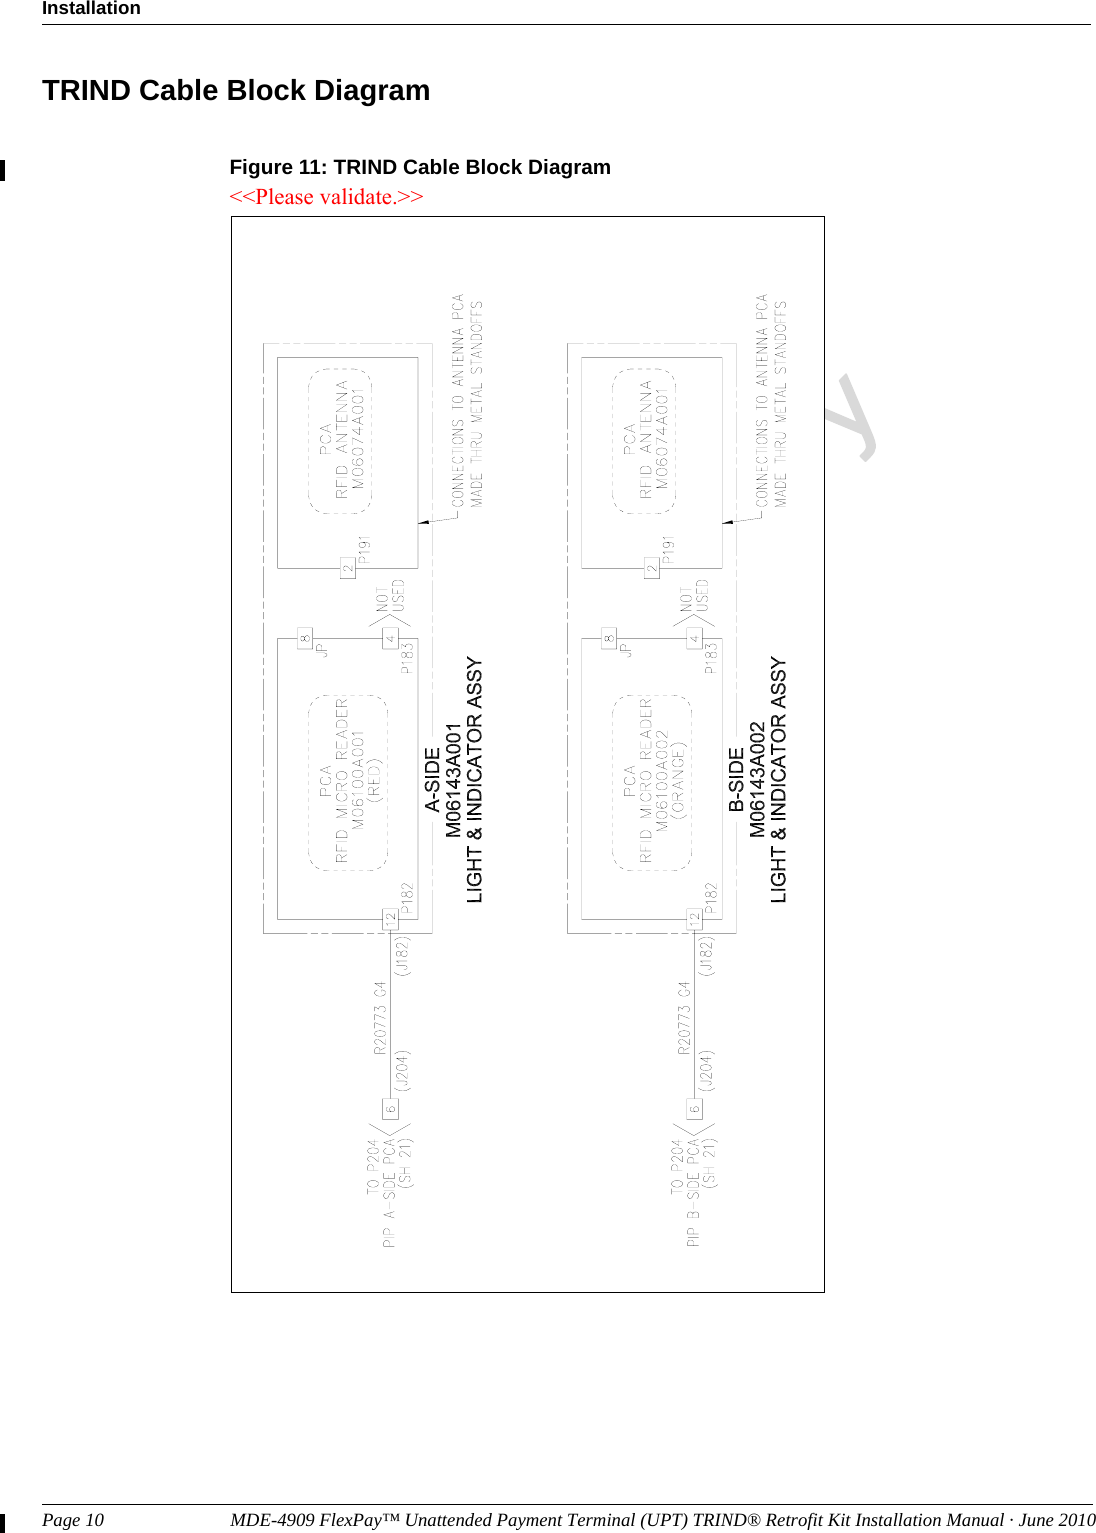 Page 10                           MDE-4909 FlexPay™ Unattended Payment Terminal (UPT) TRIND® Retrofit Kit Installation Manual · June 2010InstallationPreliminaryTRIND Cable Block DiagramFigure 11: TRIND Cable Block Diagram&lt;&lt;Please validate.&gt;&gt;